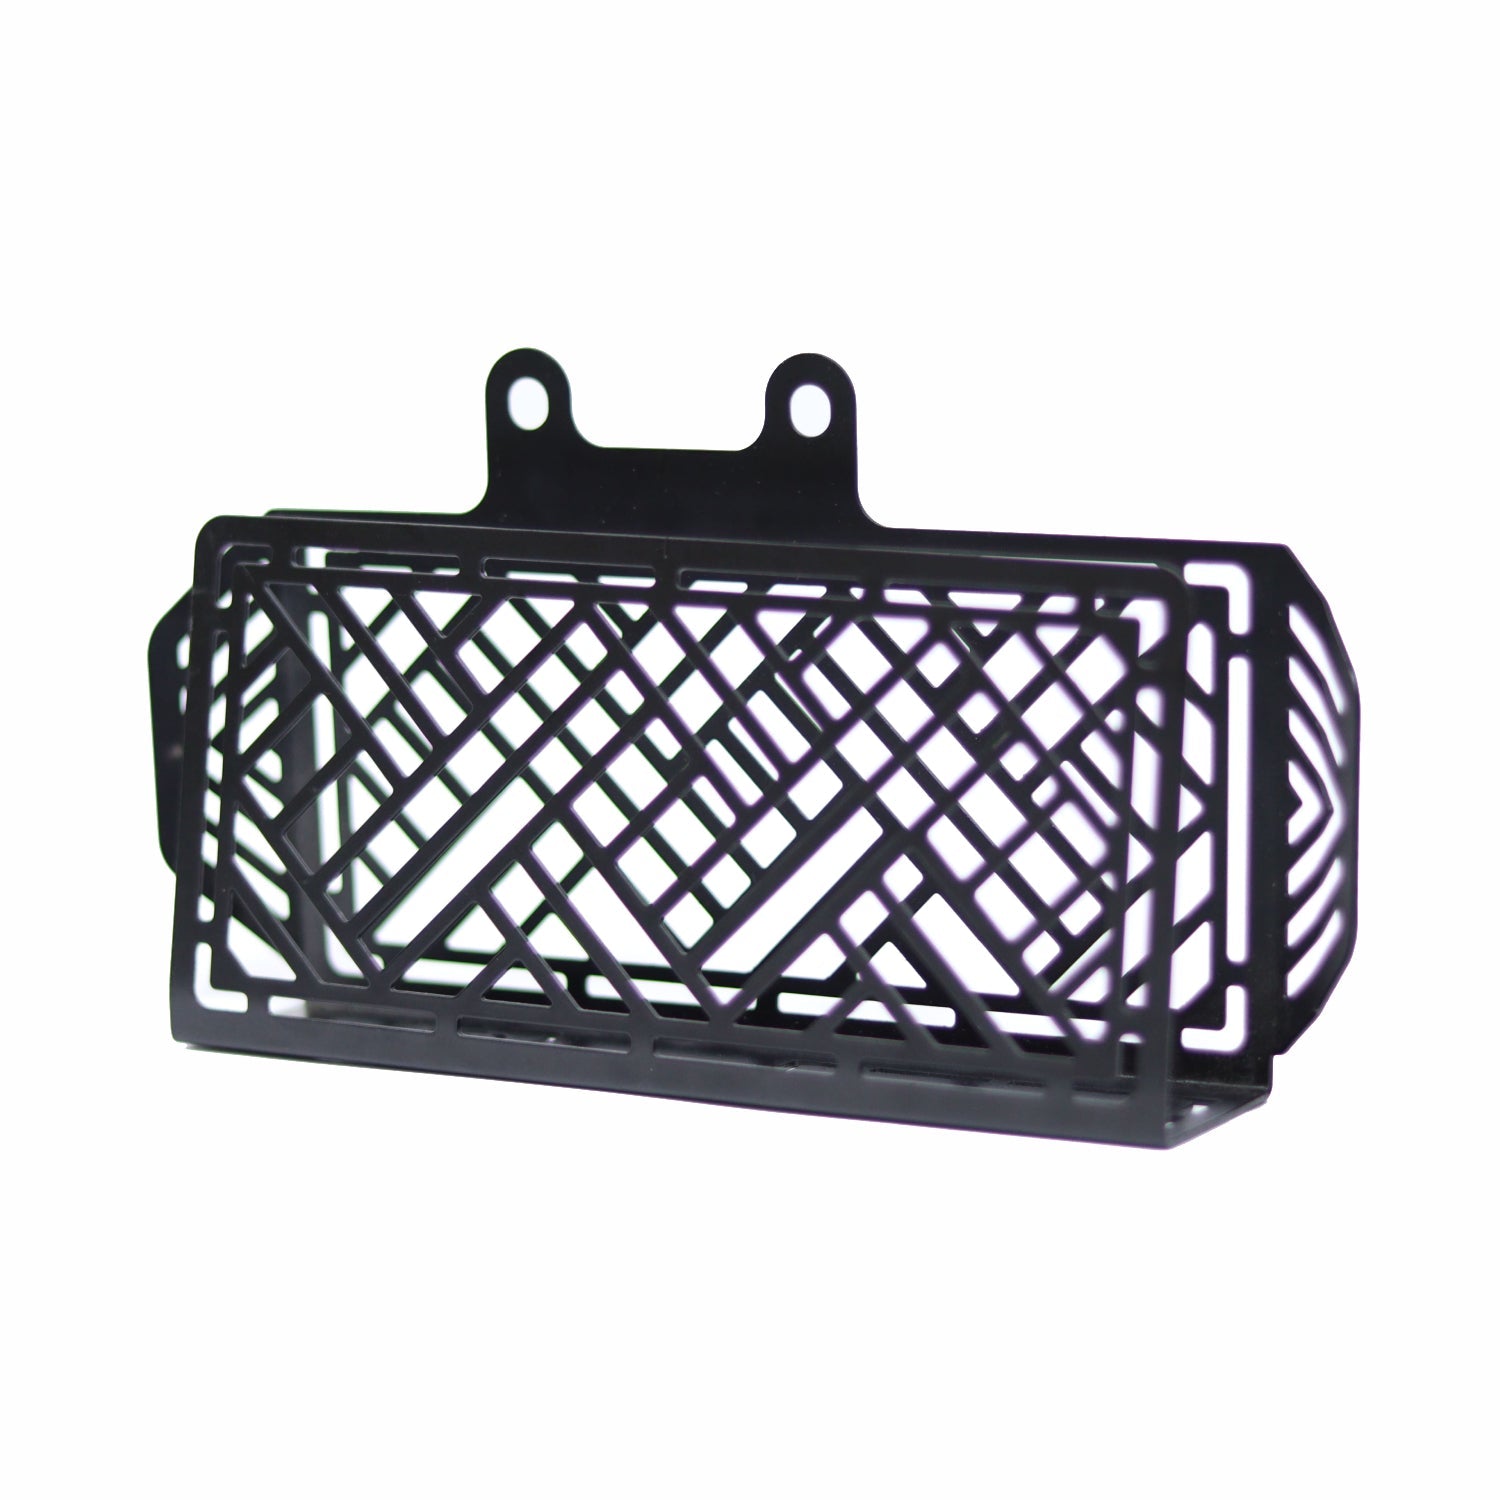 Modern Tech Radiator Guard Protector Grill For Royal Enfield Himalayan BS4/BS6